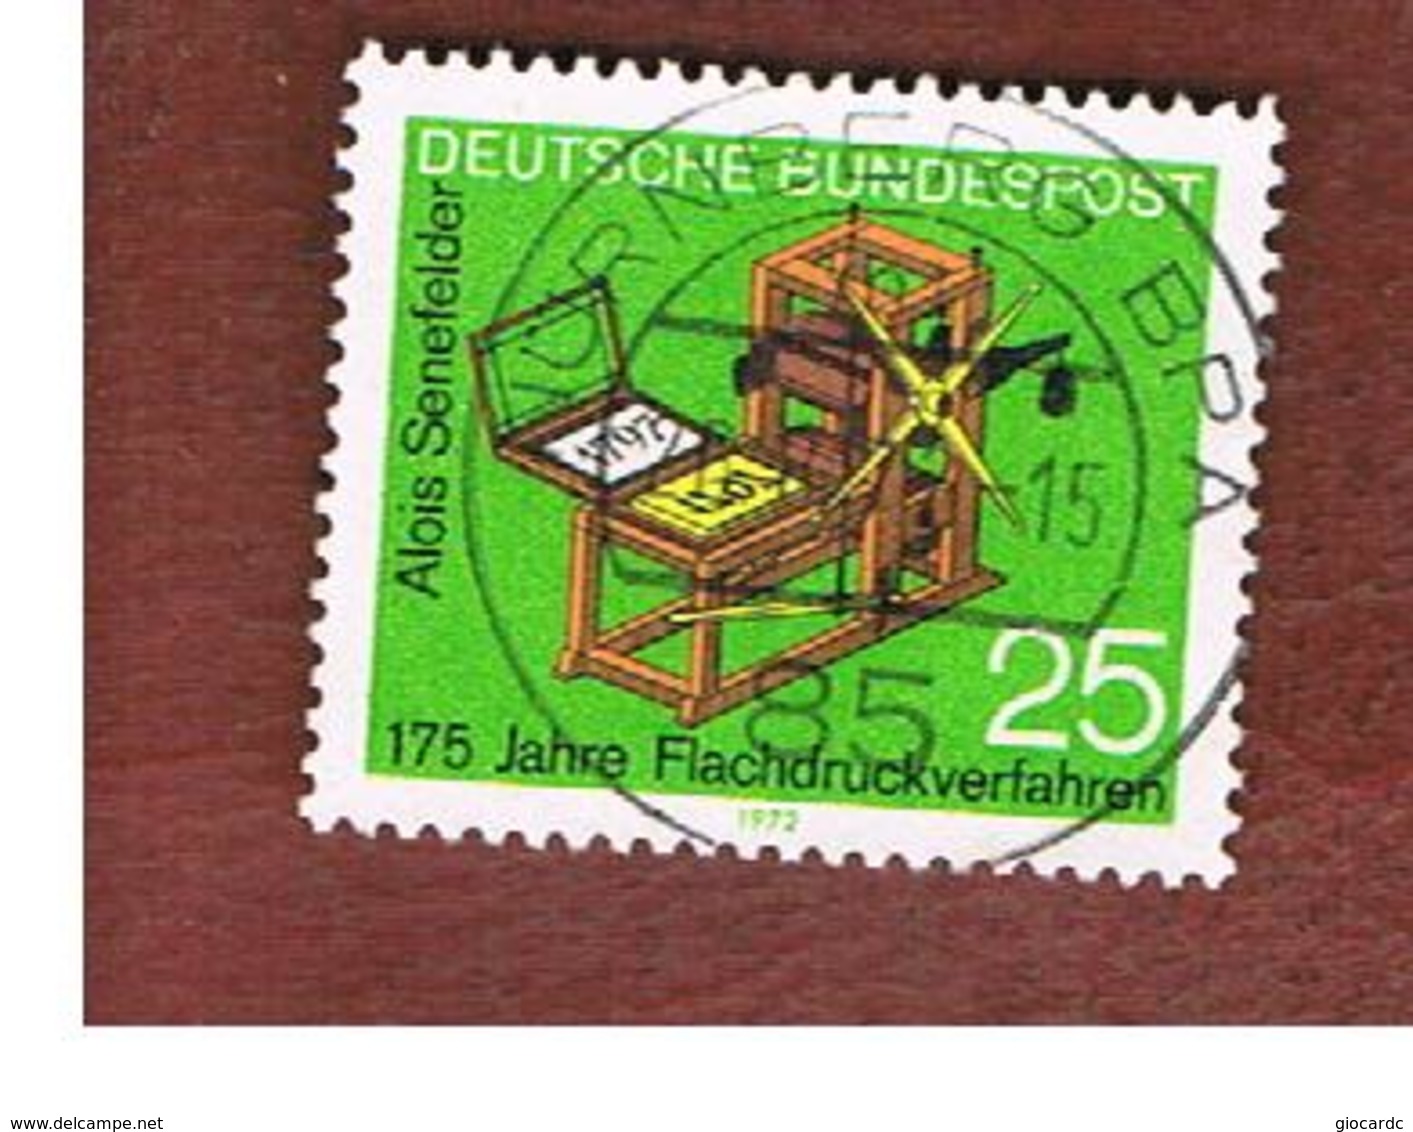 GERMANIA (GERMANY) - SG 1617  - 1972  OFFSET LITHOGRAFHY - USED - Oblitérés